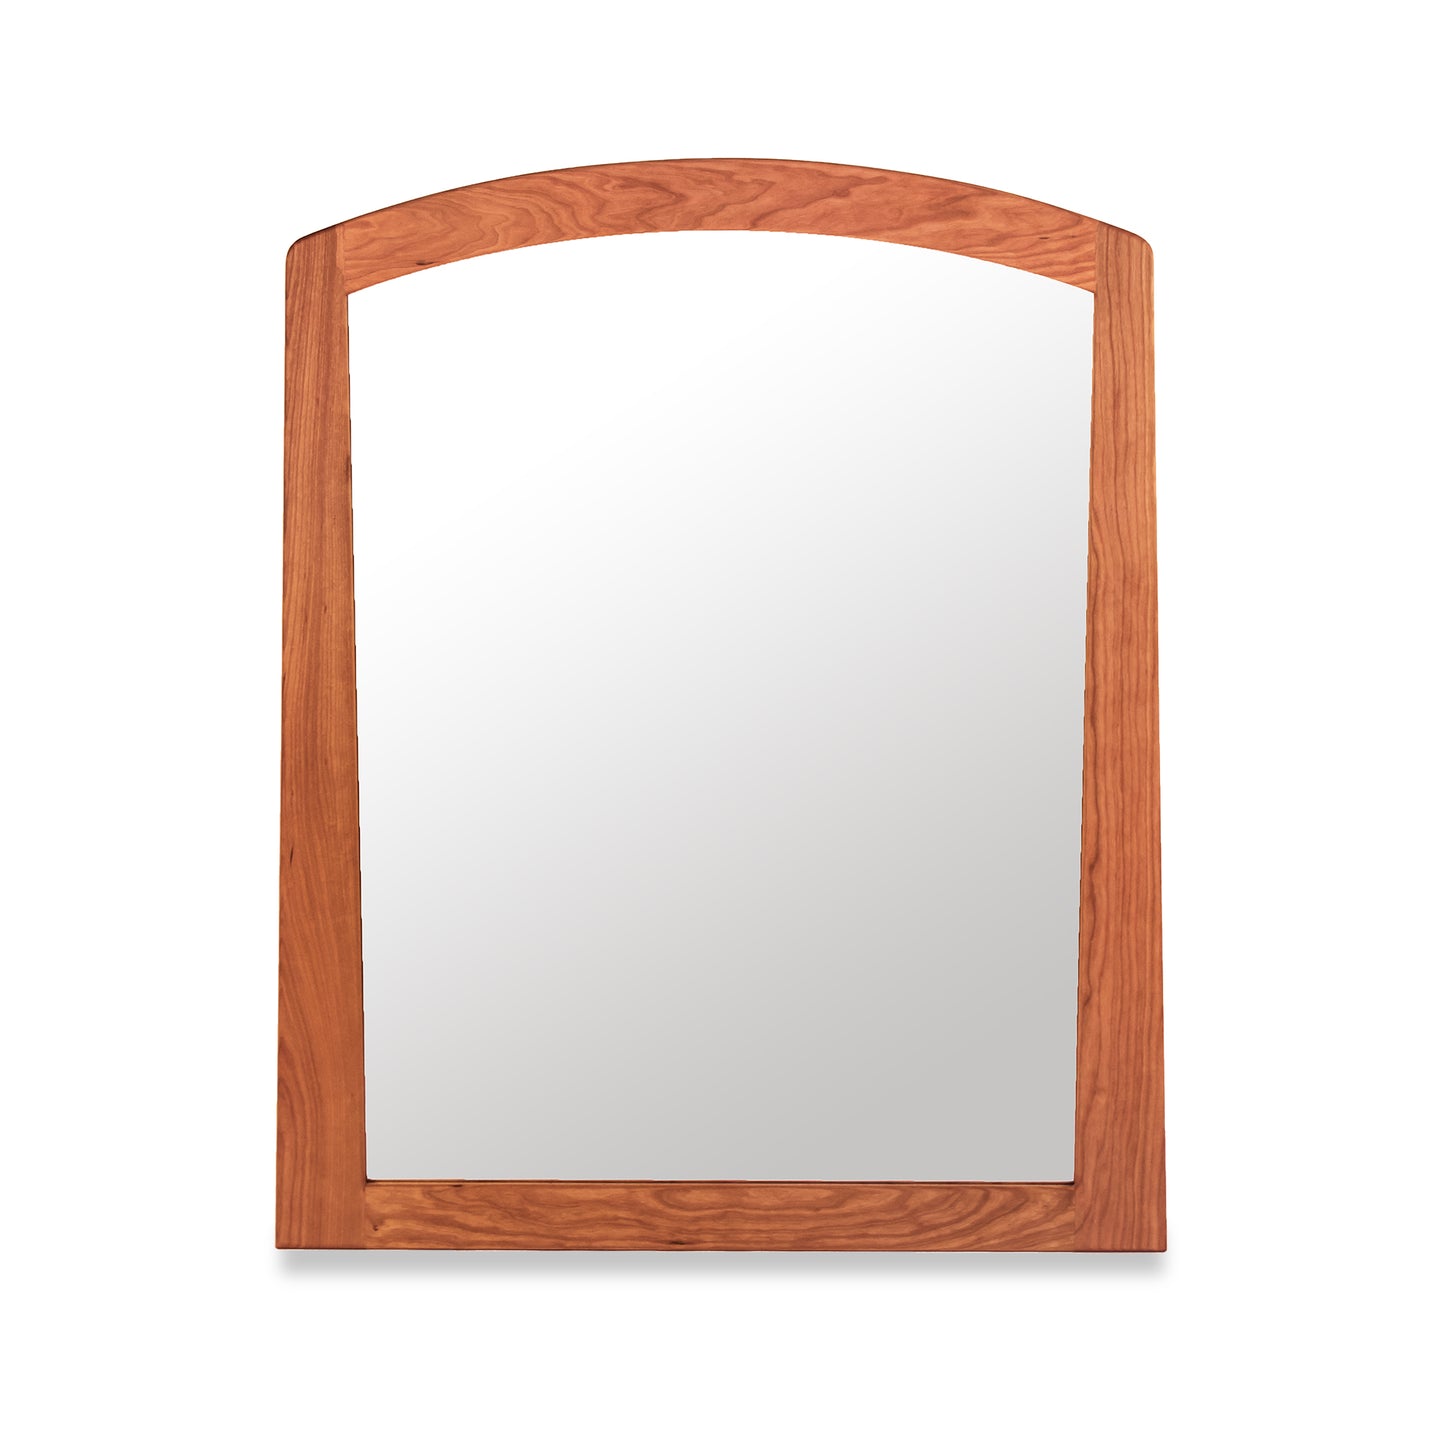 A Cherry Moon Vertical Mirror by Maple Corner Woodworks with a hardwood frame on a white background.